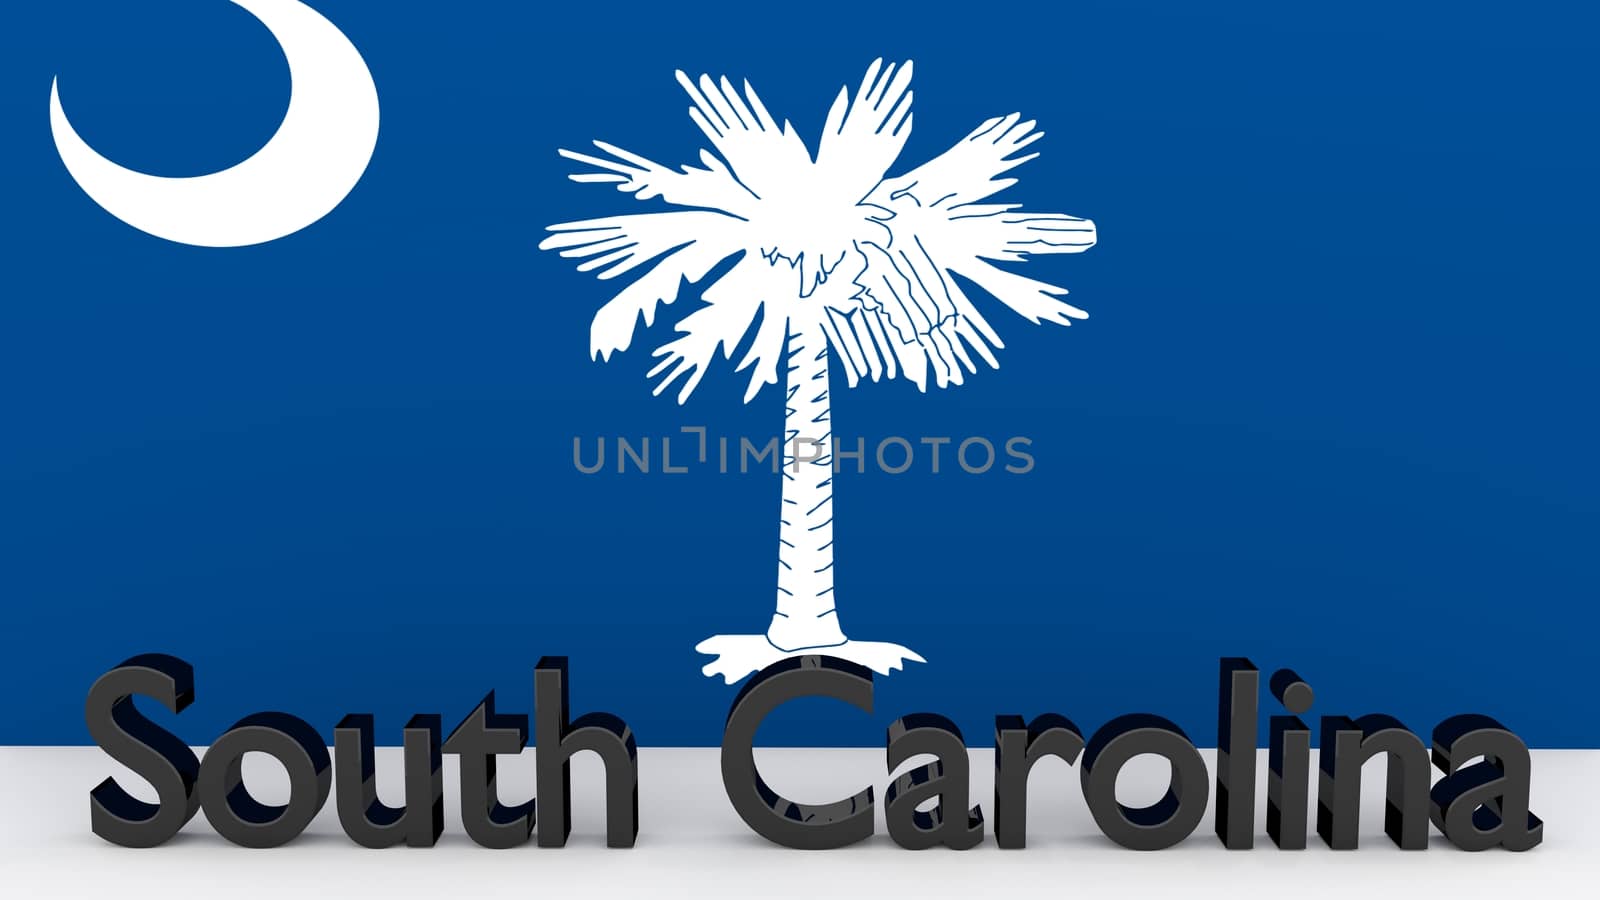 US state South Carolina, metal name in front of flag by MarkDw